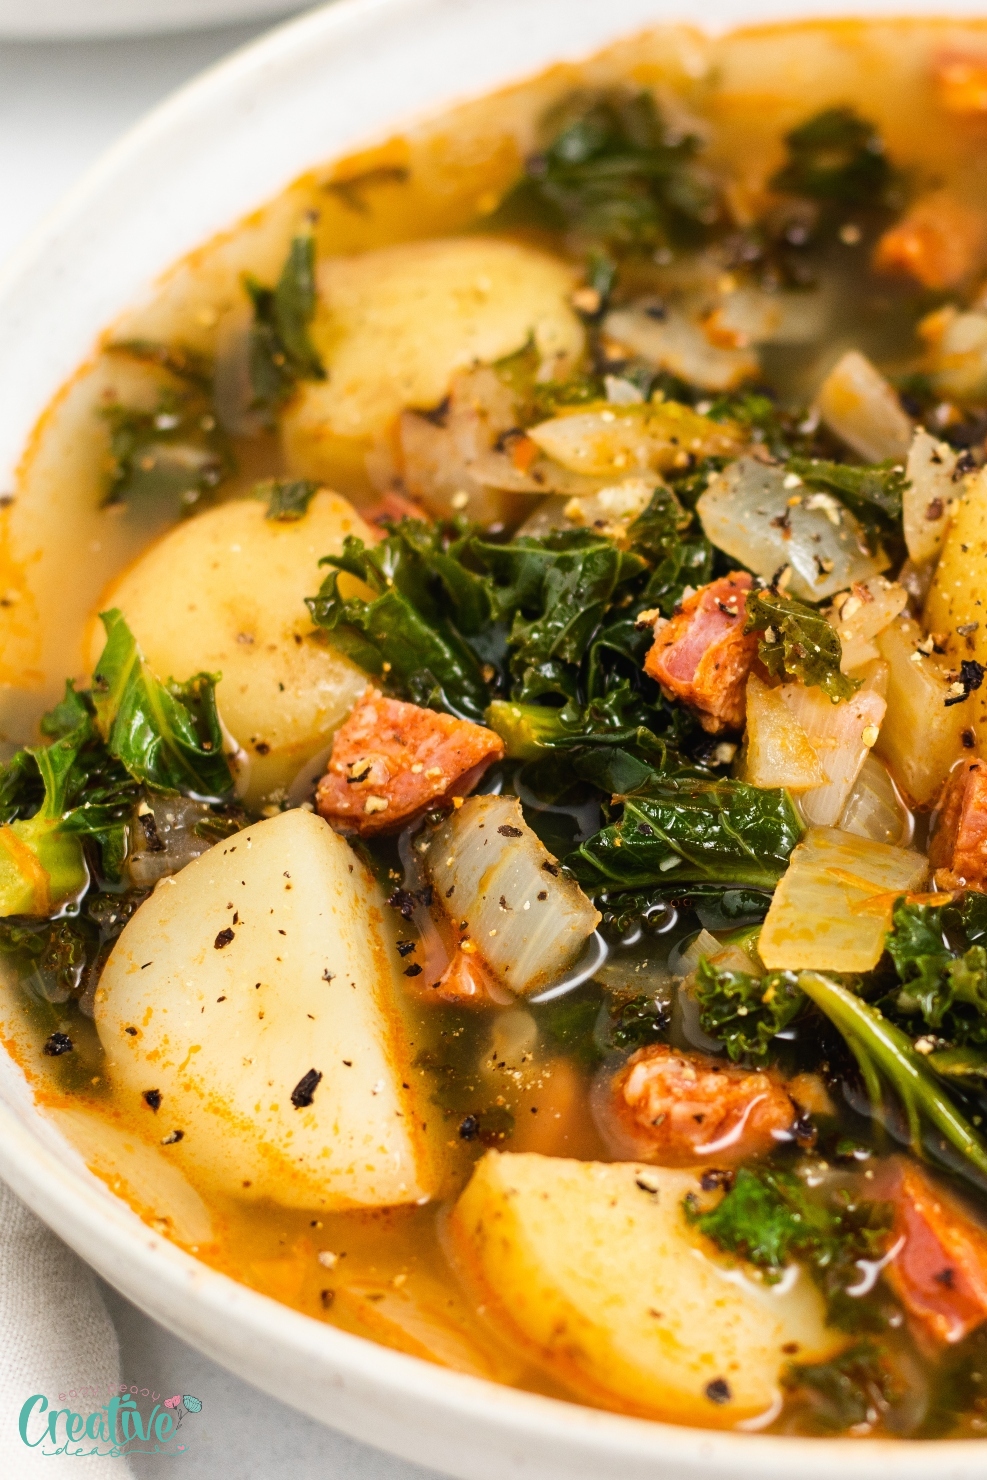 A nutritious bowl of chorizo kale potato soup, flavorful and packed with wholesome ingredients.